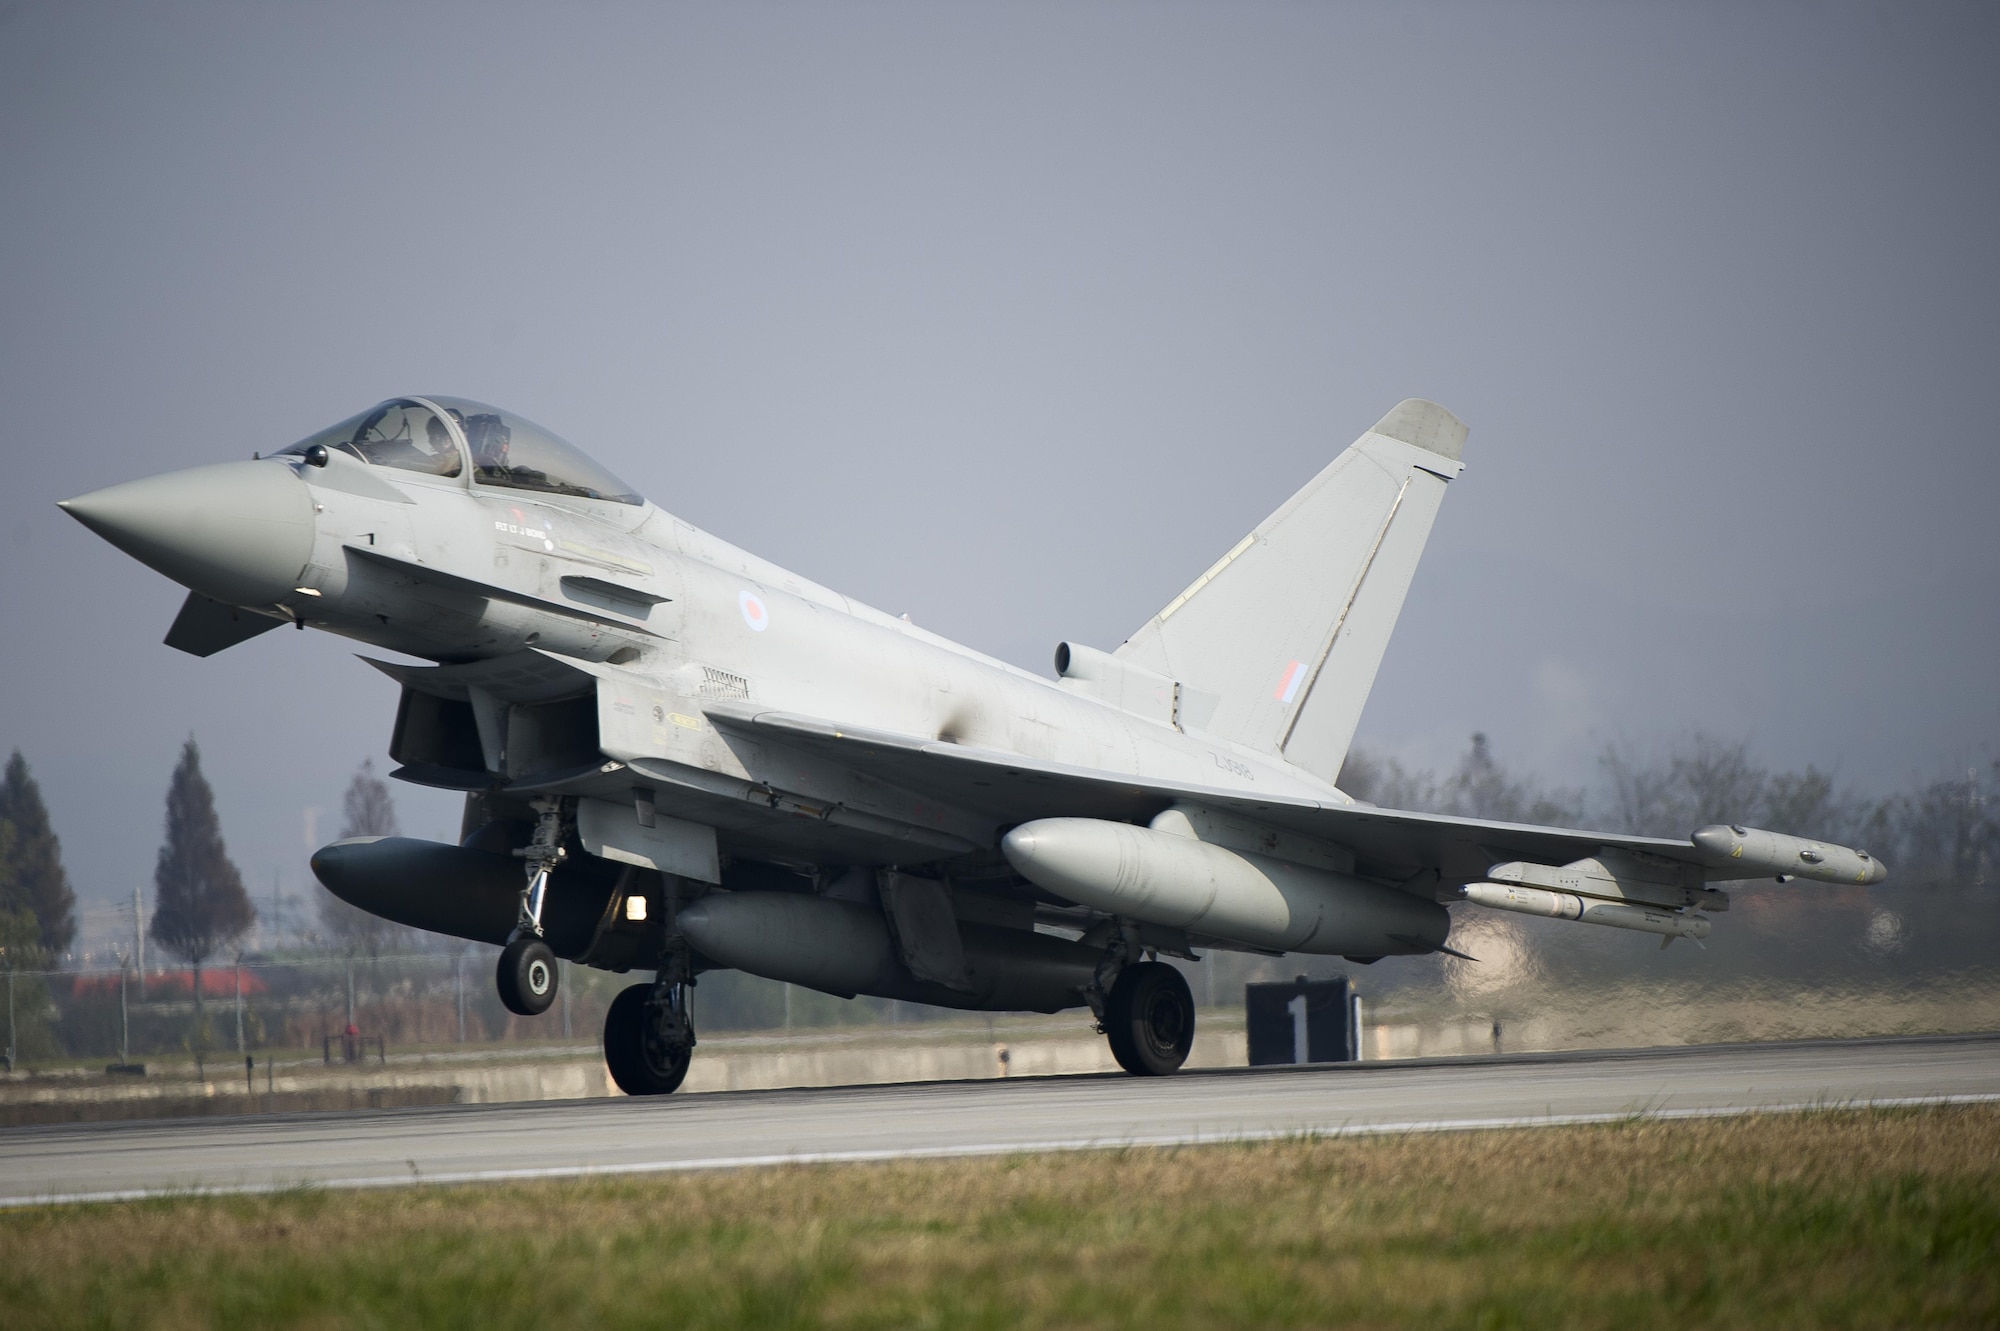 A United Kingdom Royal Air Force Typhoon FGR4 lands during Invincible Shield on Osan Air Base, Republic of Korea, Nov. 8, 2016. The intent of Invincible Shield is to bolster the strong partnership between the RoK, the United States and the United Kingdom while improving the combat capability in the Pacific region. (U.S. Air Force photo by Staff Sgt. Jonathan Steffen)